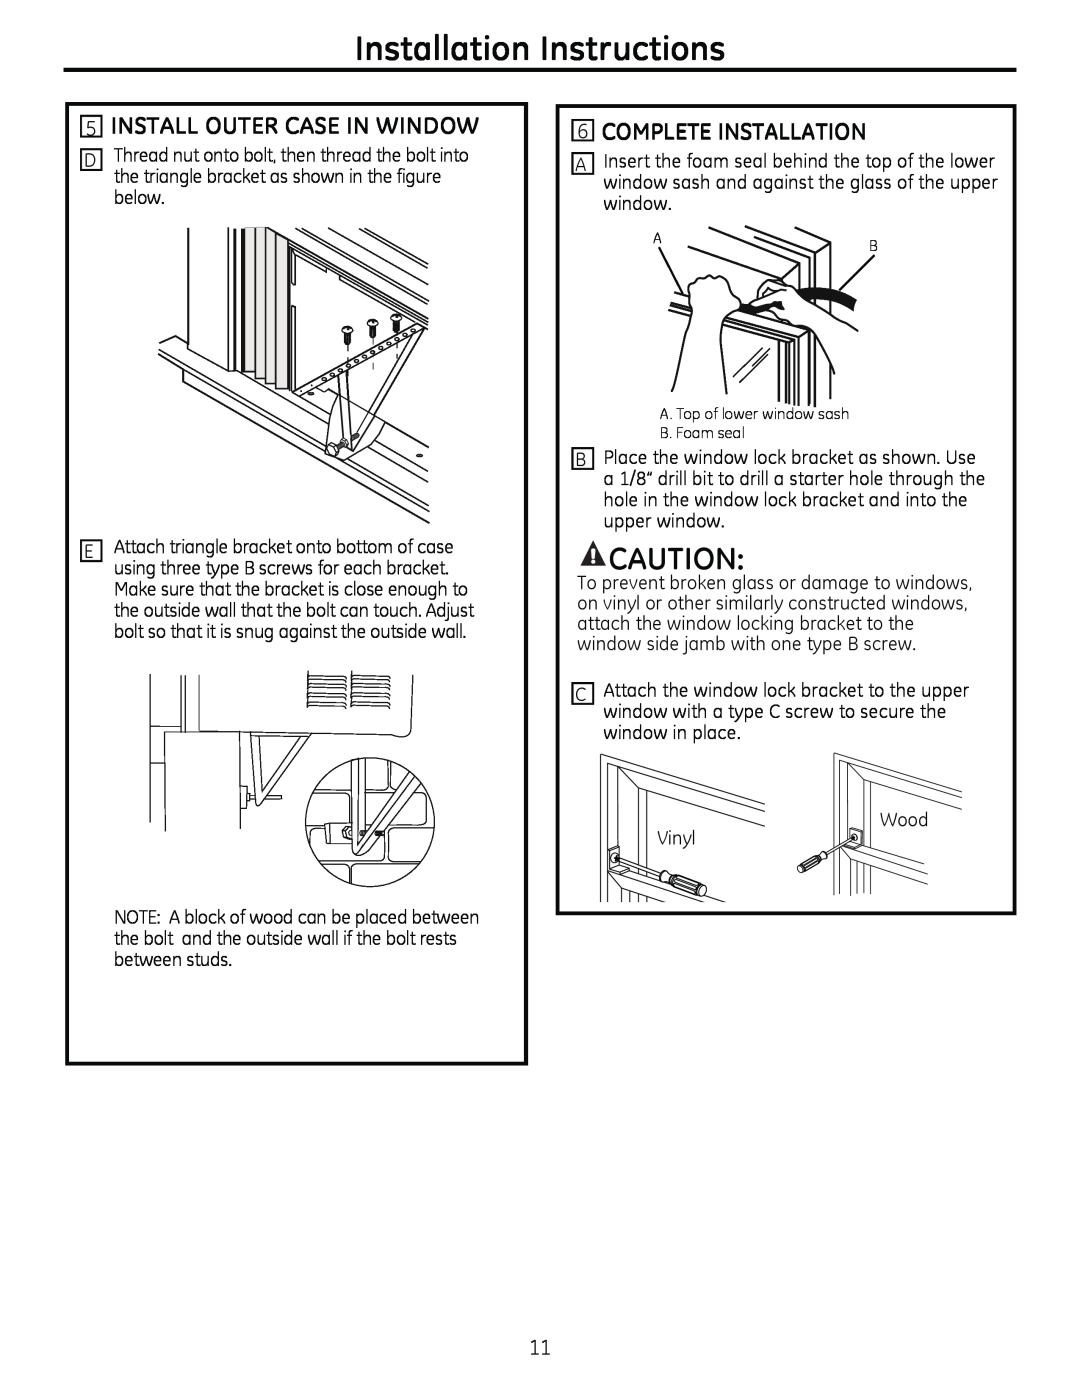 GE AHM18 operating instructions Install Outer Case In Window, 6COMPLETE INSTALLATION, Installation Instructions 